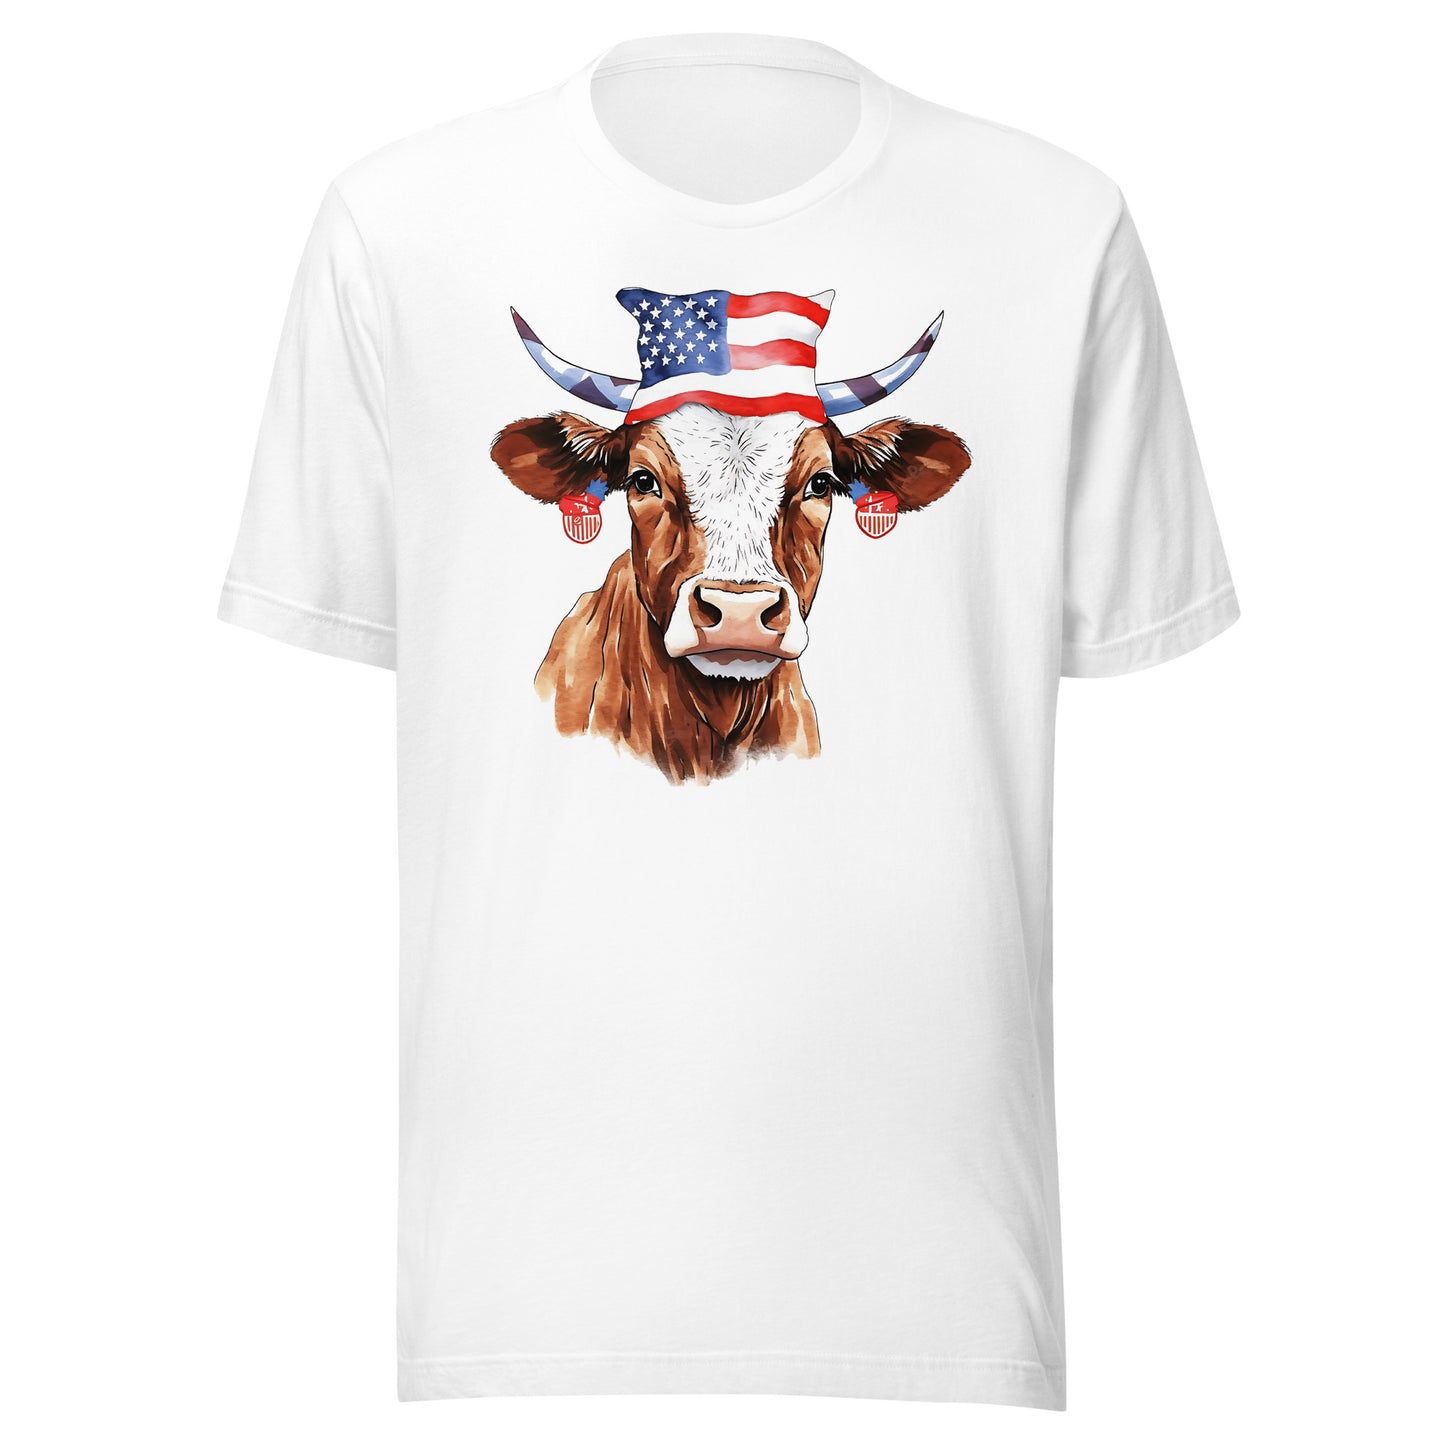 Patriotic Cow Tshirt For Cow Lovers White Color